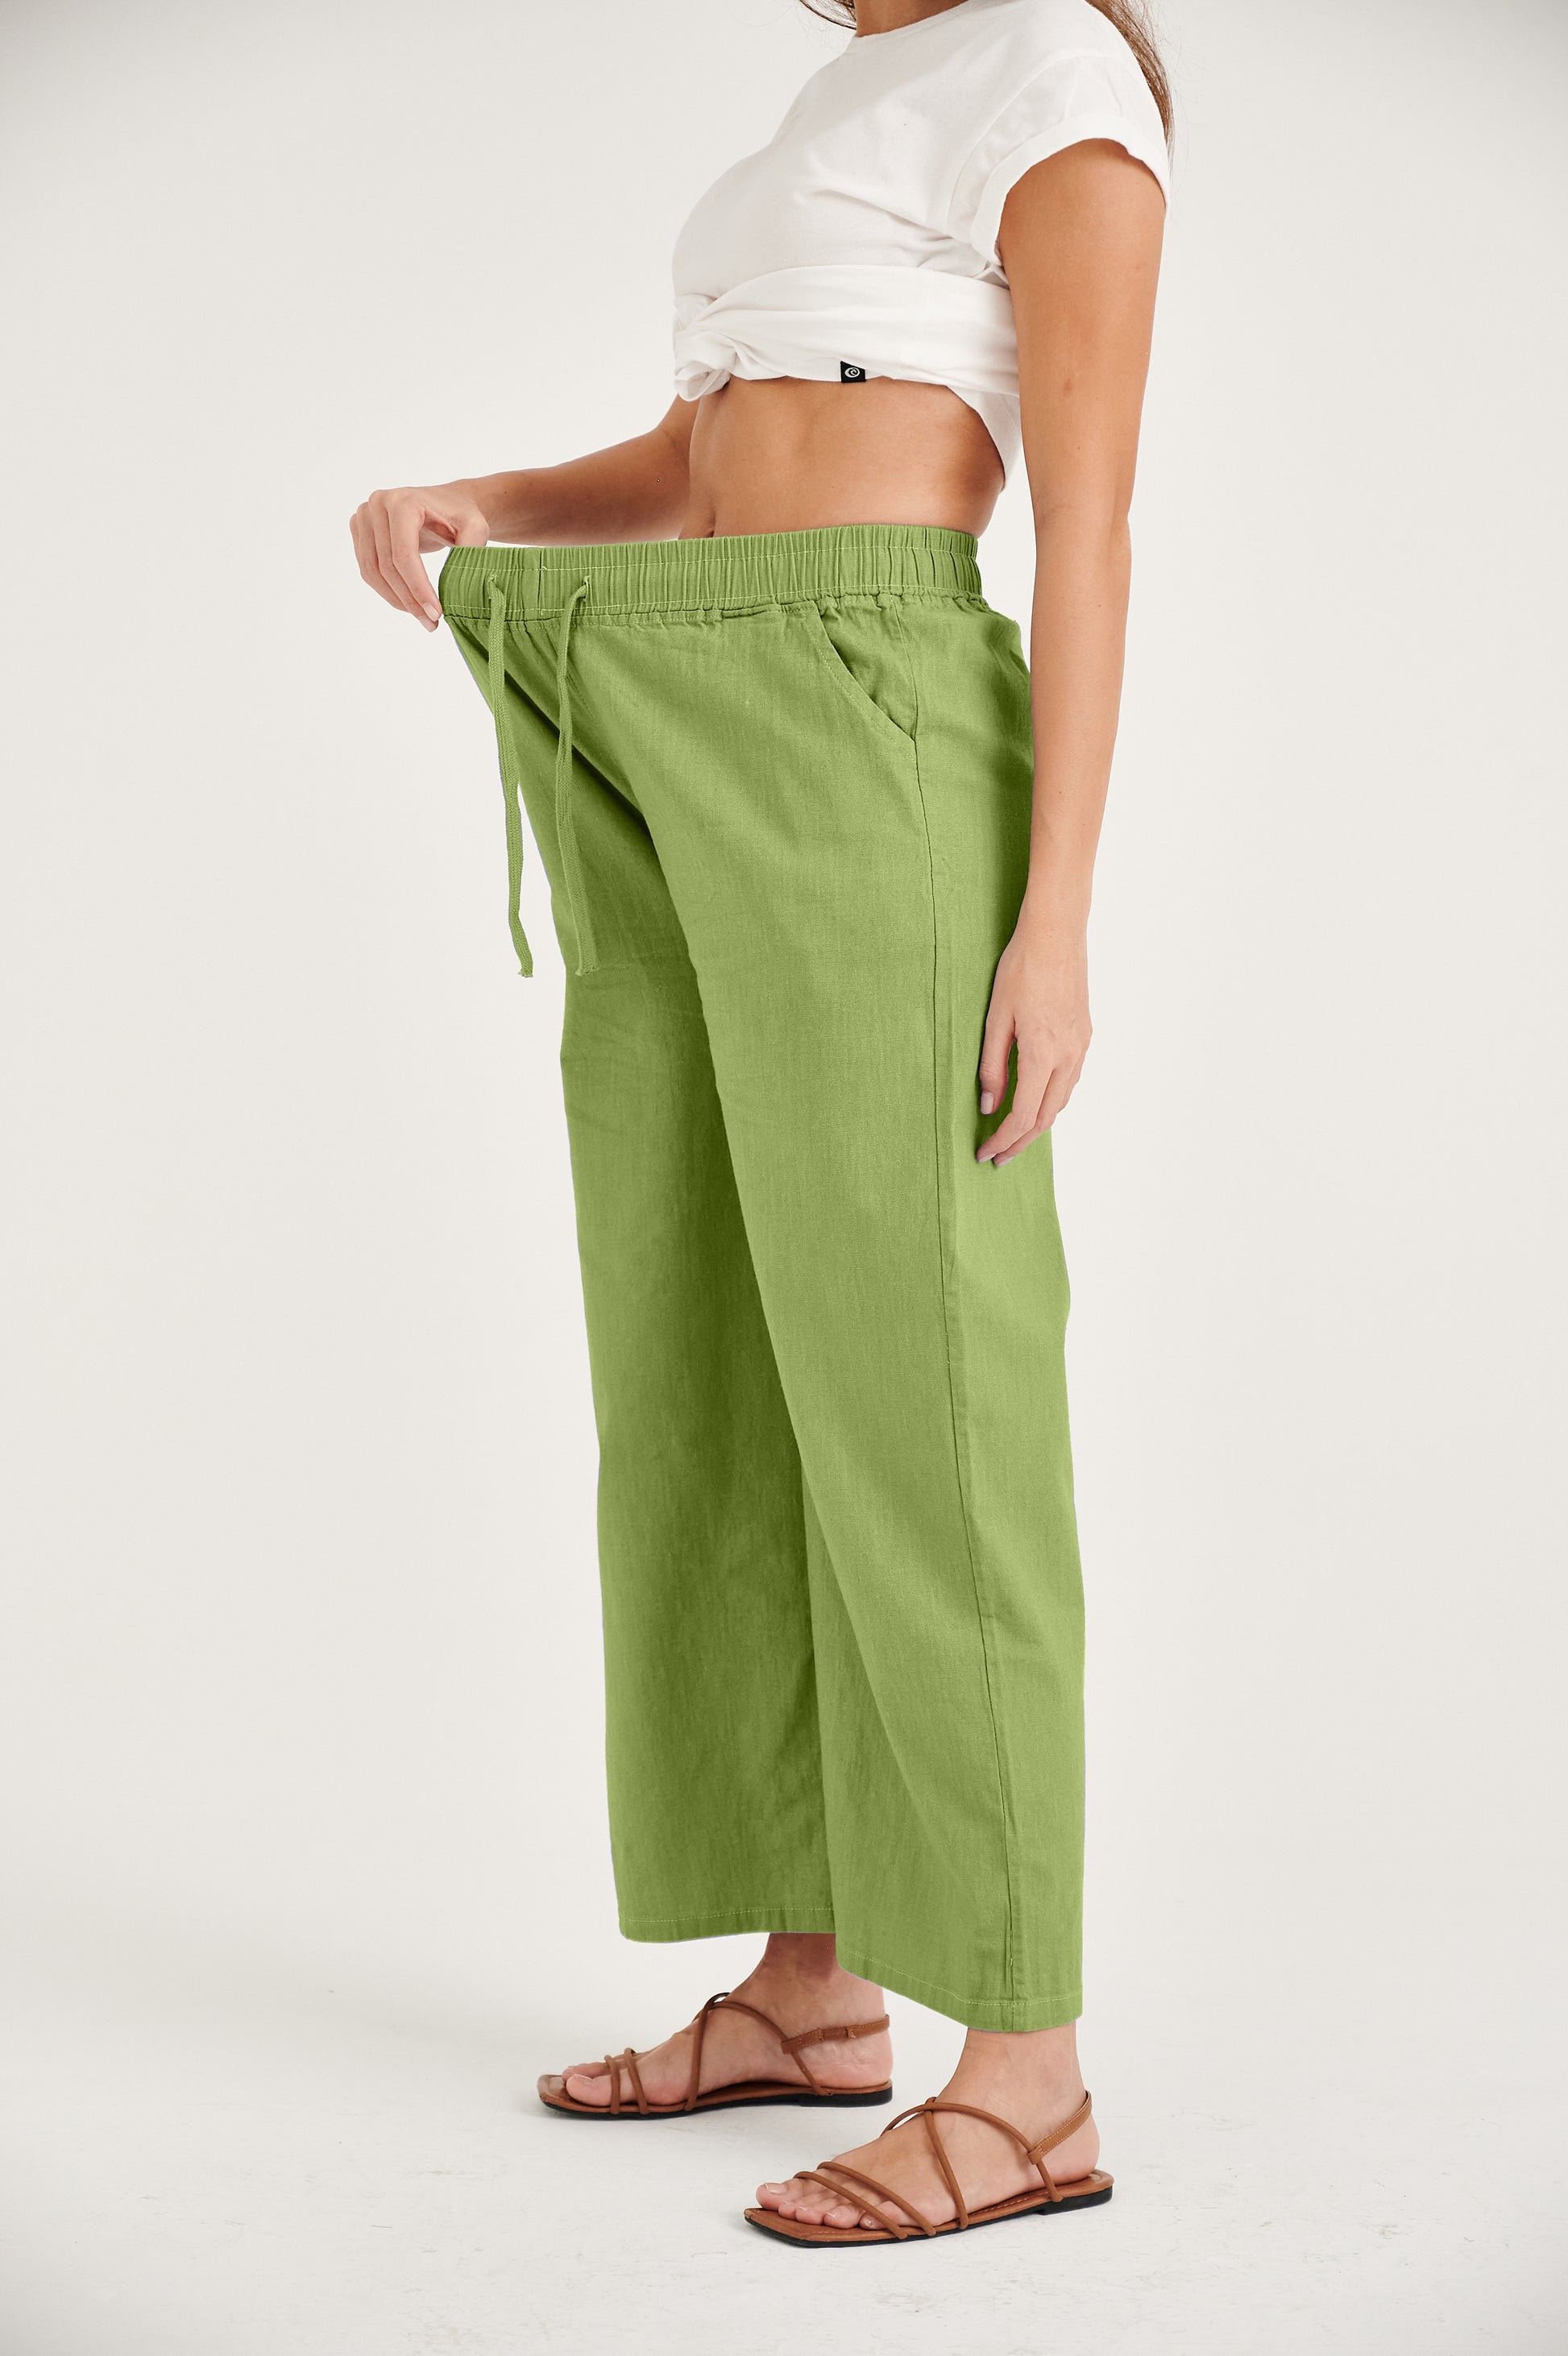 Comfy and stylish pants for leisure or work